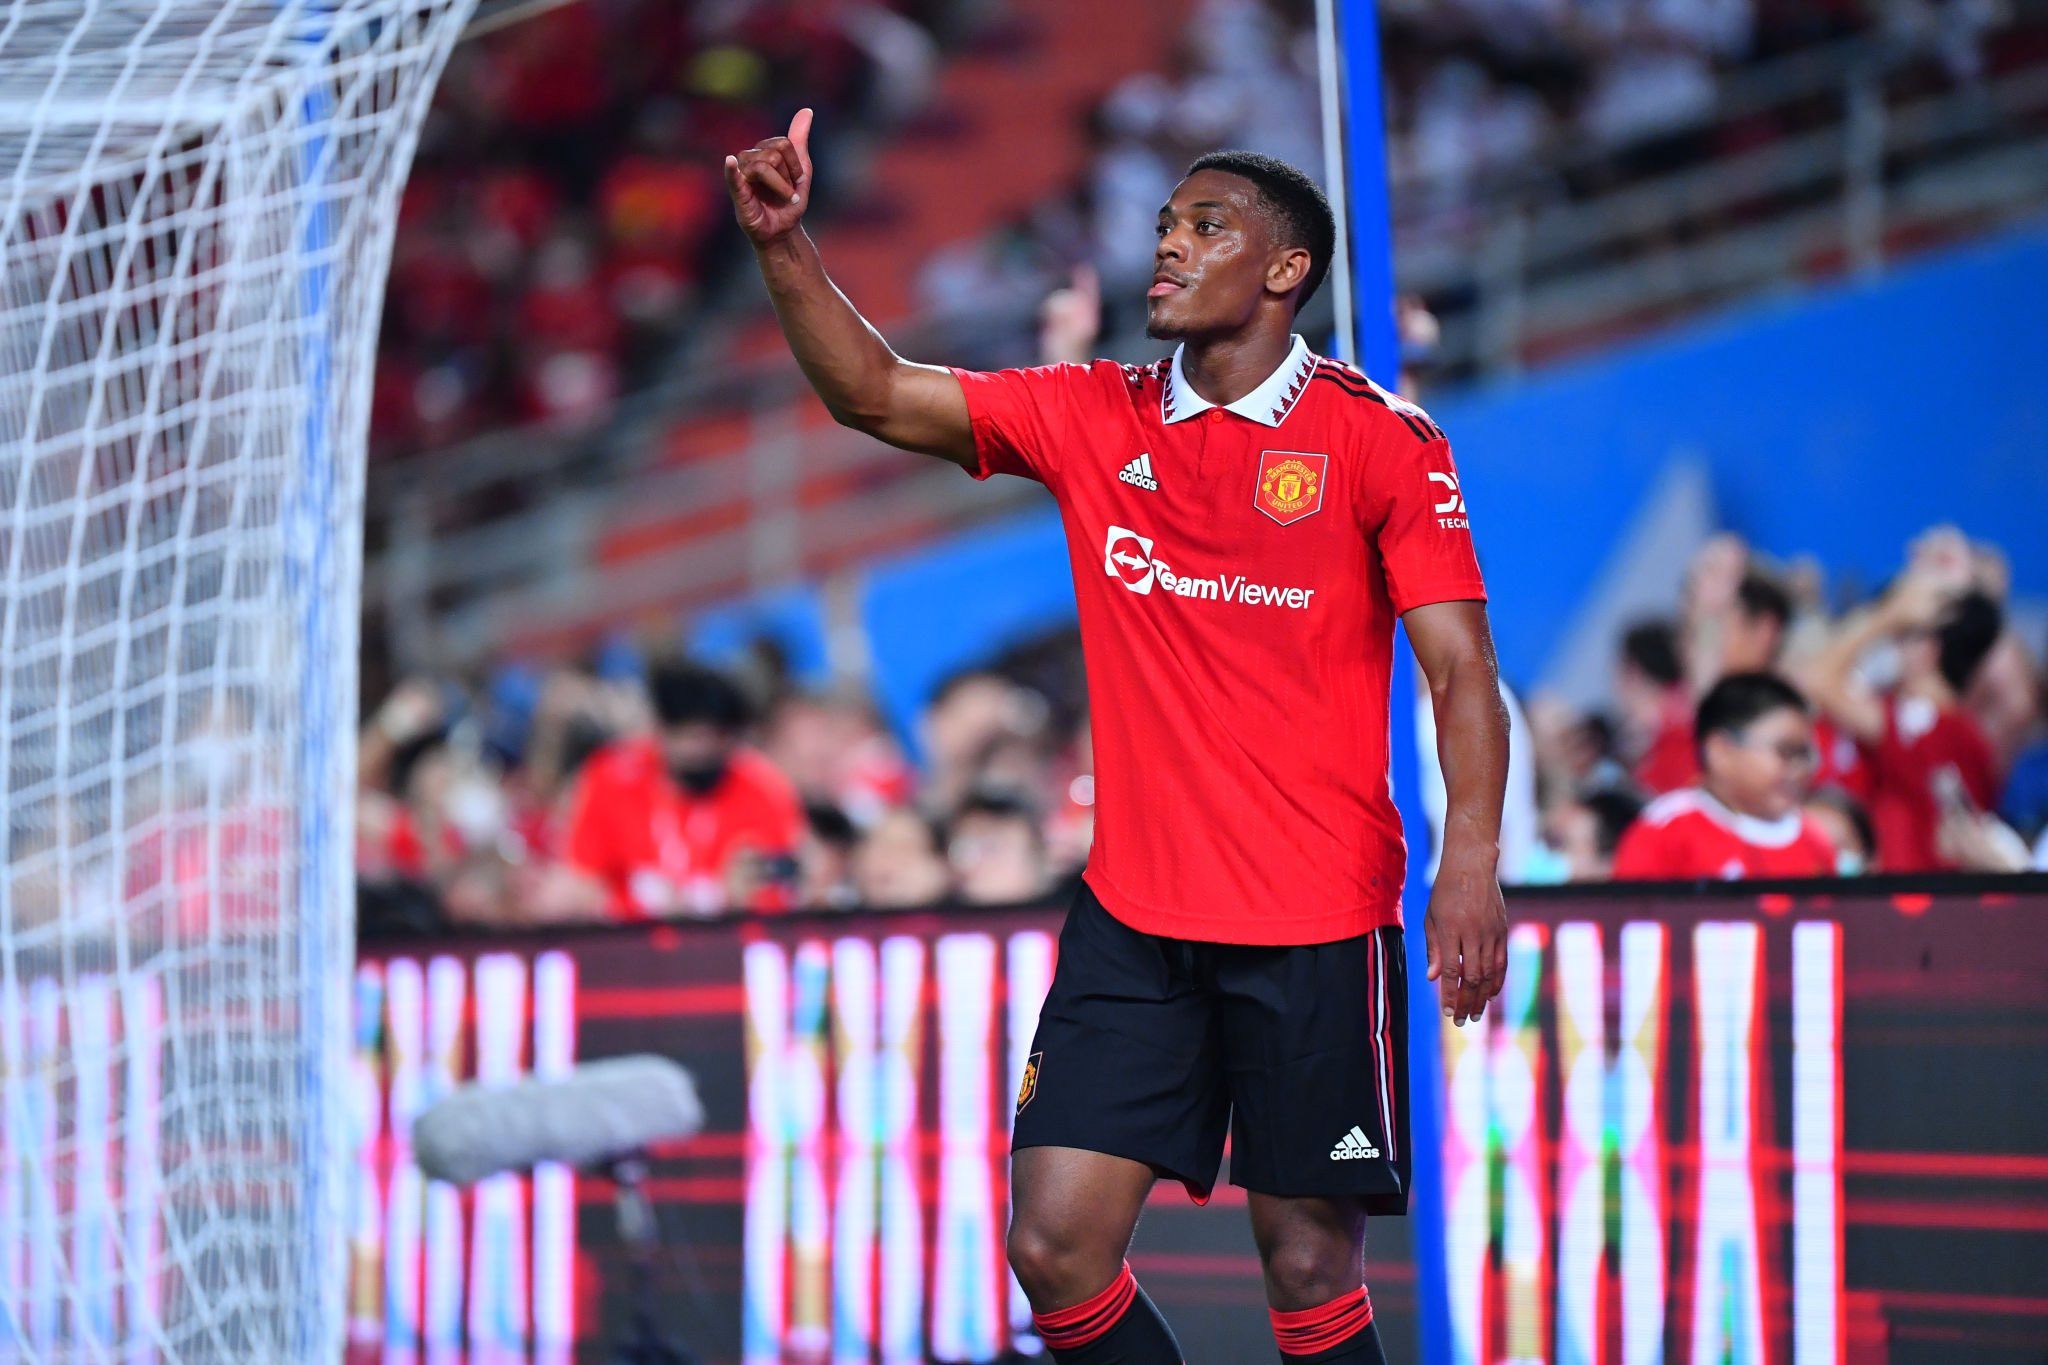 ‘I haven’t seen him sprint in five years’ – Andy Cole tears into Manchester United ‘enigma’ Anthony Martial - Bóng Đá